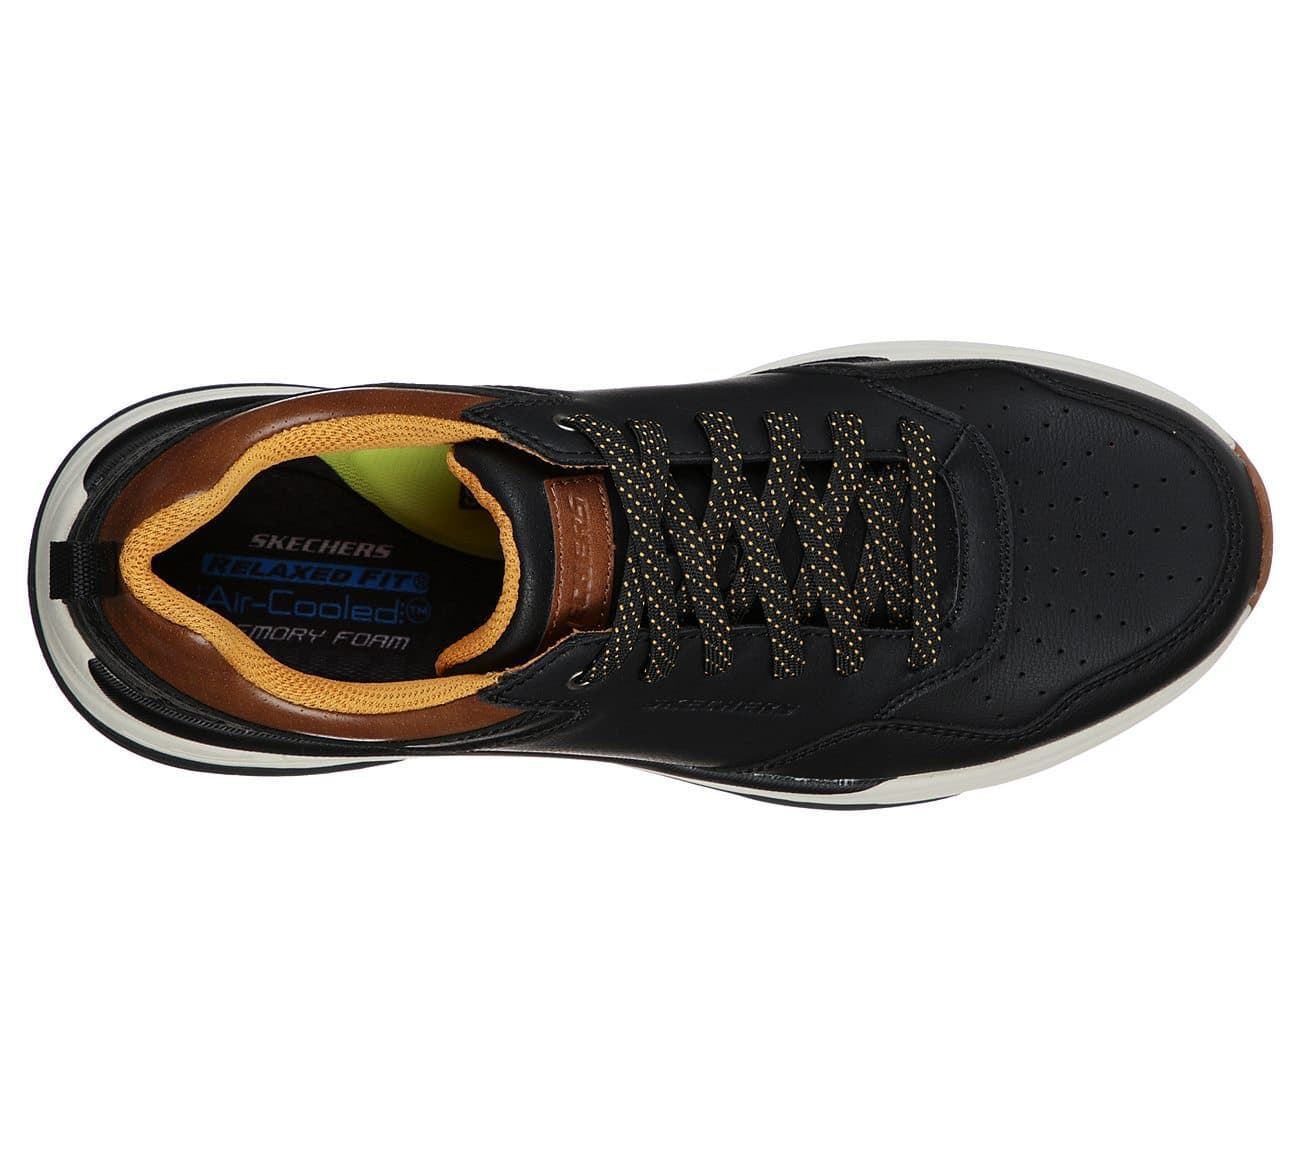 Skechers_ Zapato deportivo Relaxed fit negro - Imagen 4